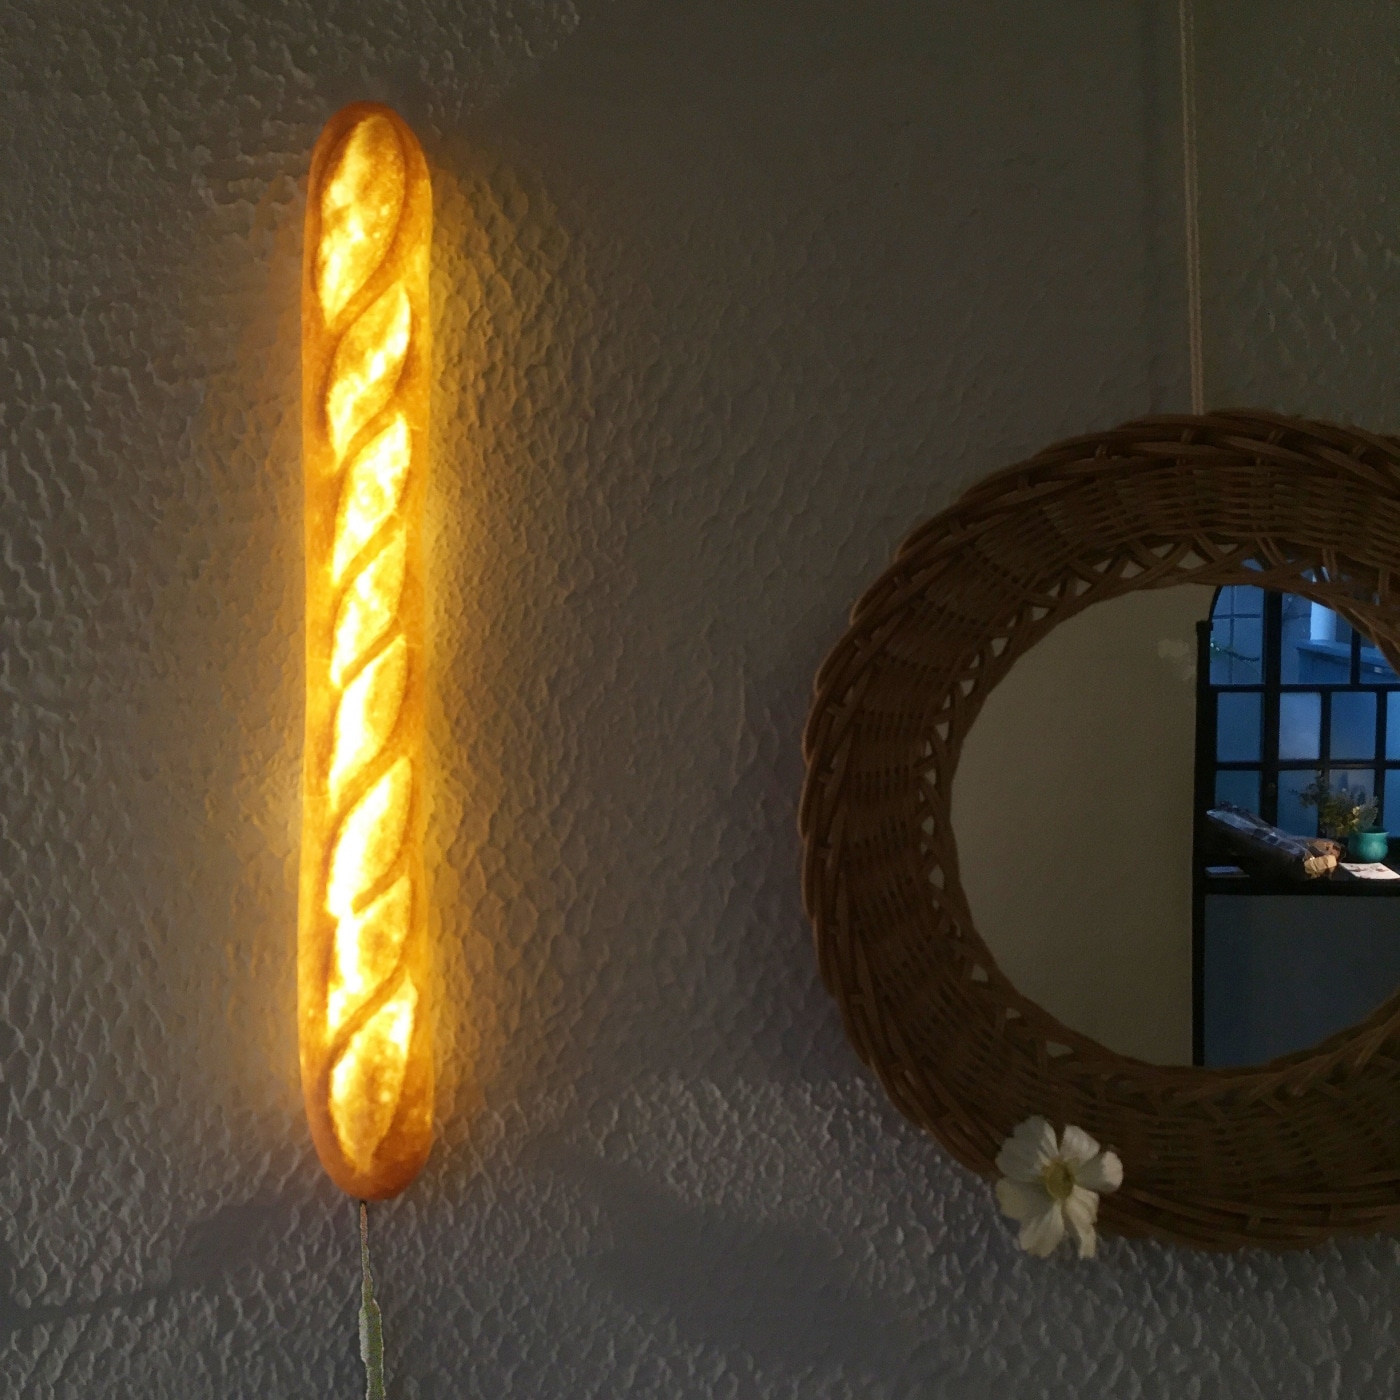 Lighting Design Made of Real Bread